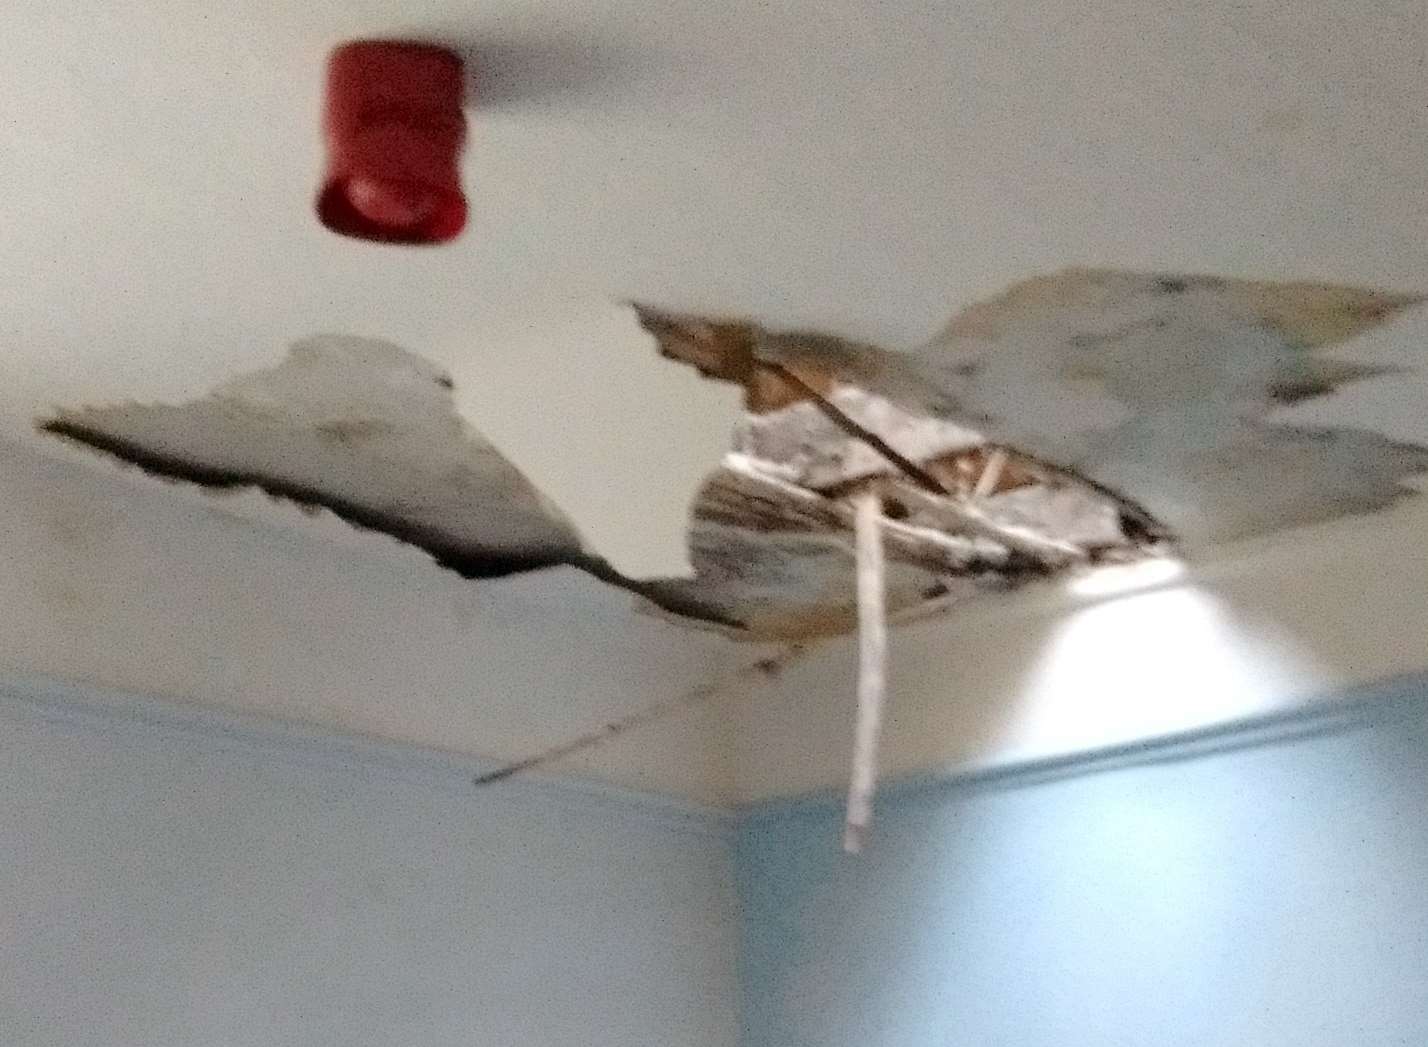 The hole in the ceiling